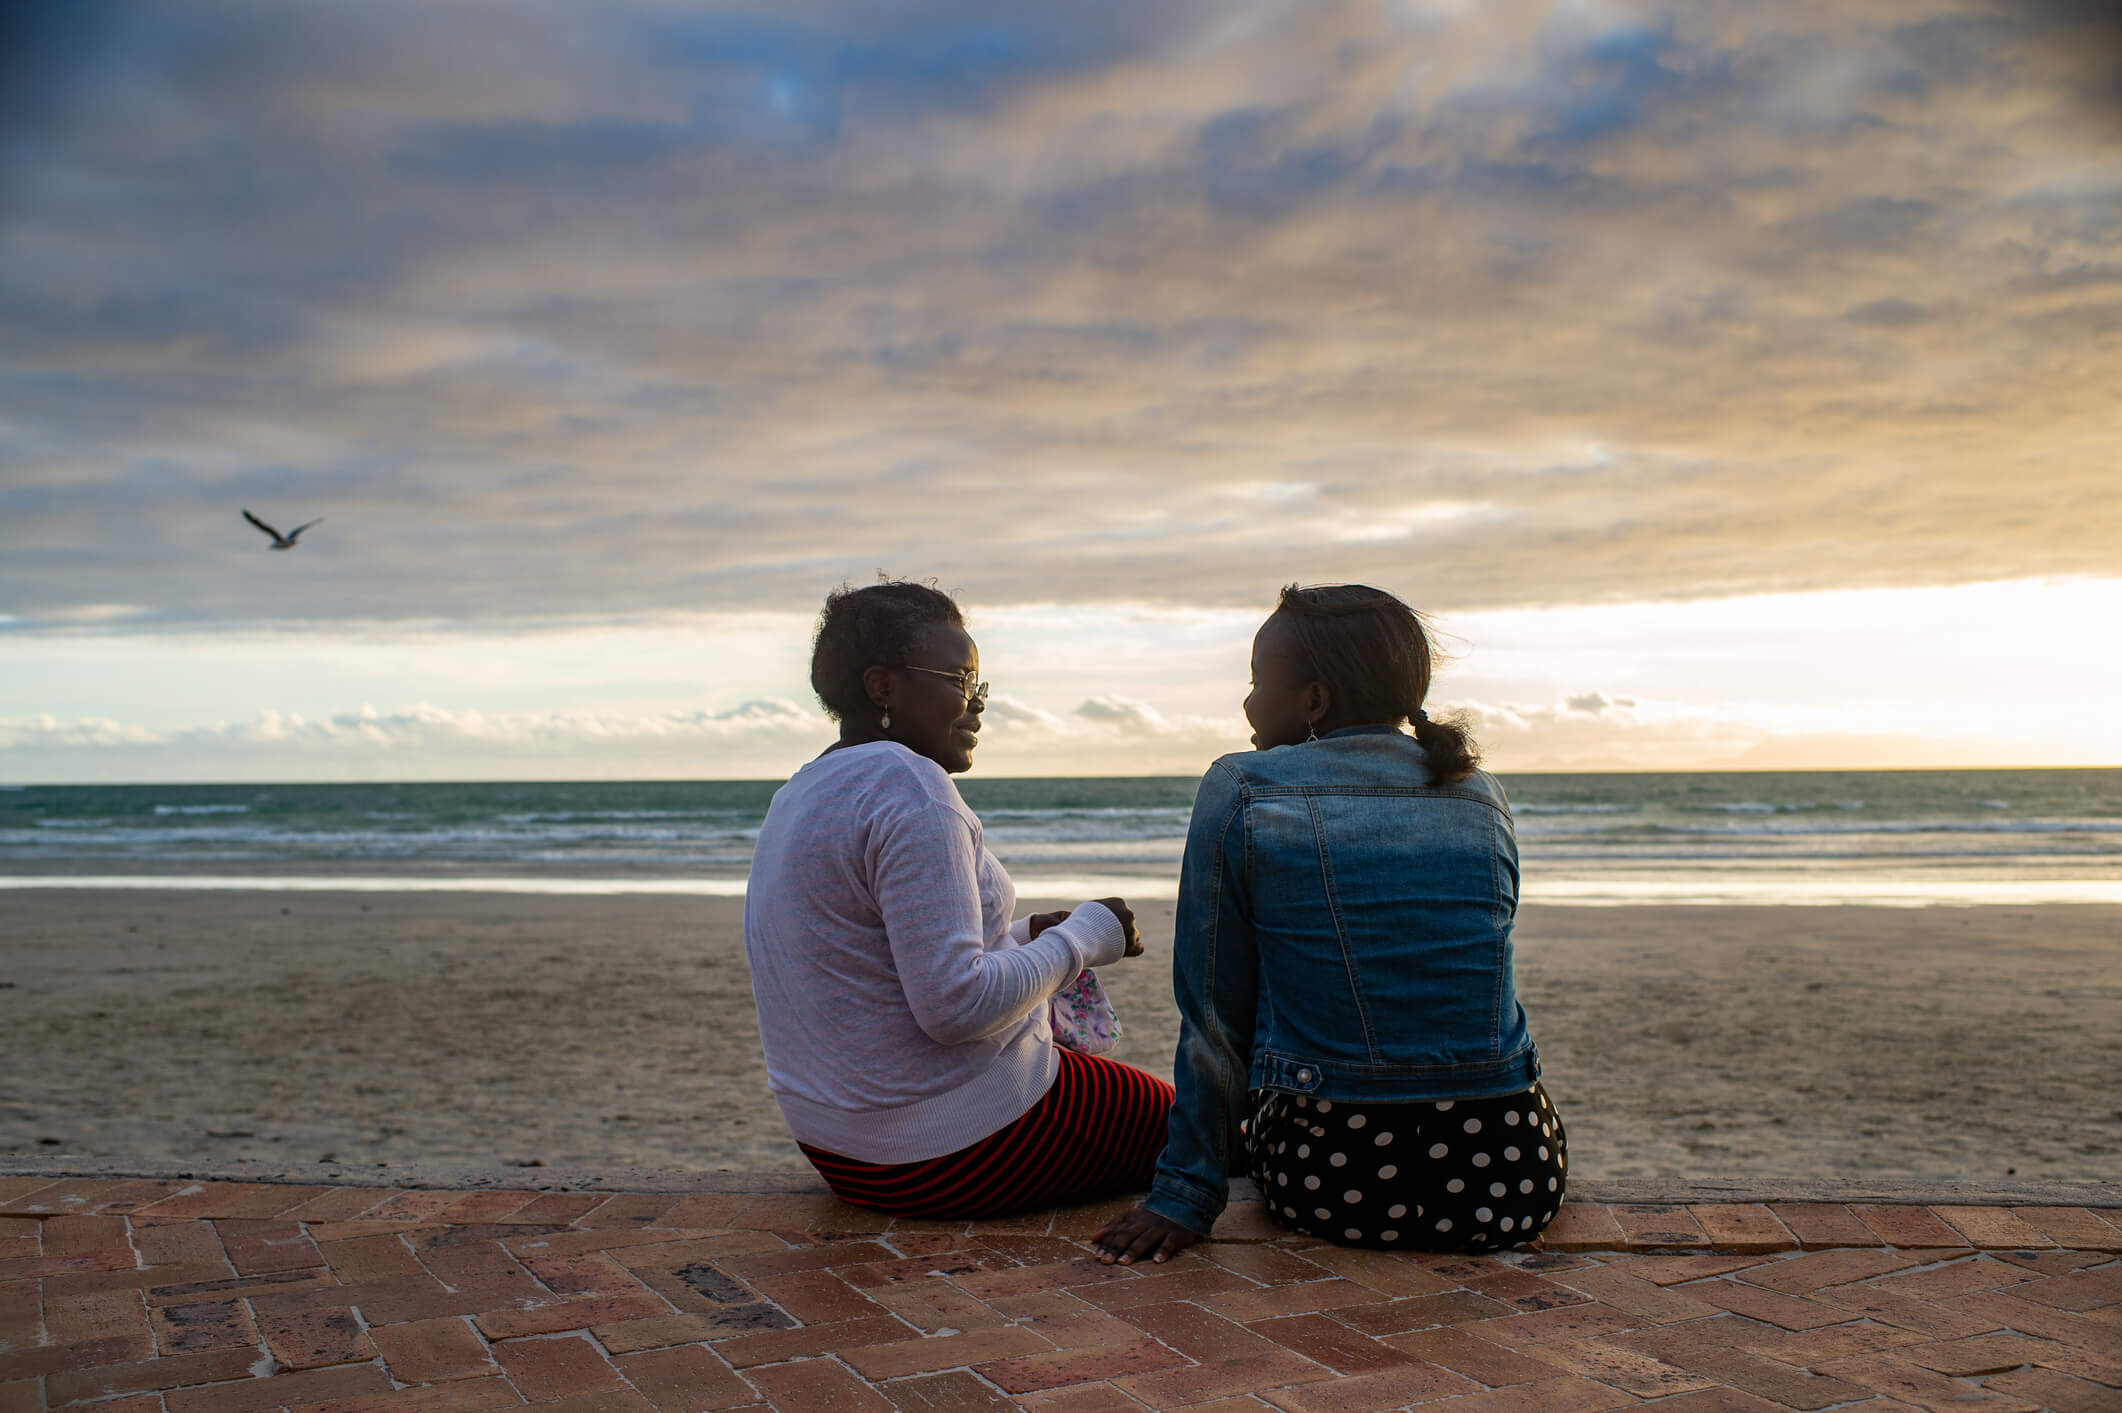 A mother and daughter sitting on the beach at sunset.